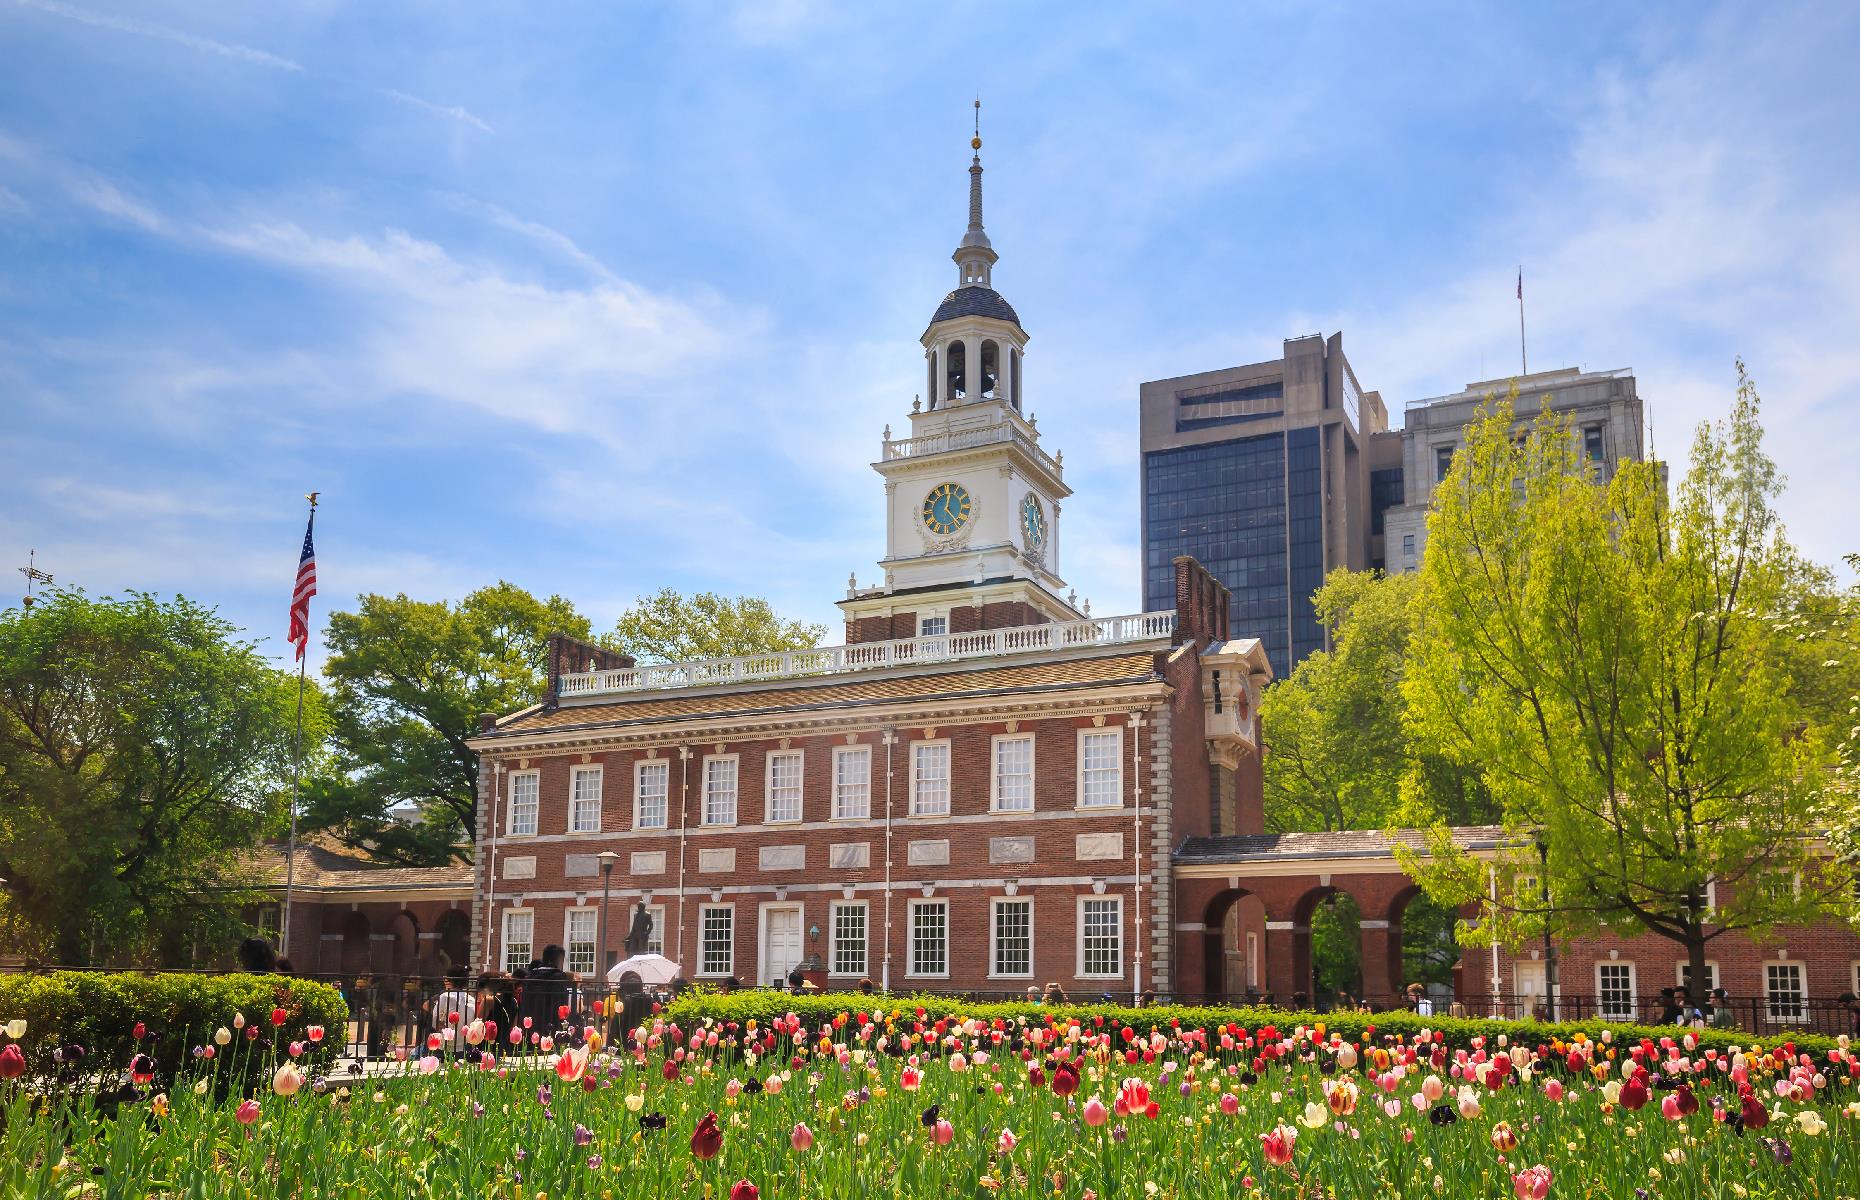 <p>Philly's <a href="https://www.nps.gov/inde/index.htm">Independence National Historic Park</a> threads together a series of seminal sites, all of which played a role in the formation of the United States as we know it today. The most important of these are Independence Hall (pictured), where both the Declaration of Independence and the U.S. Constitution were signed, and Liberty Bell Center, home to the famous Liberty Bell with its distinctive crack.</p>